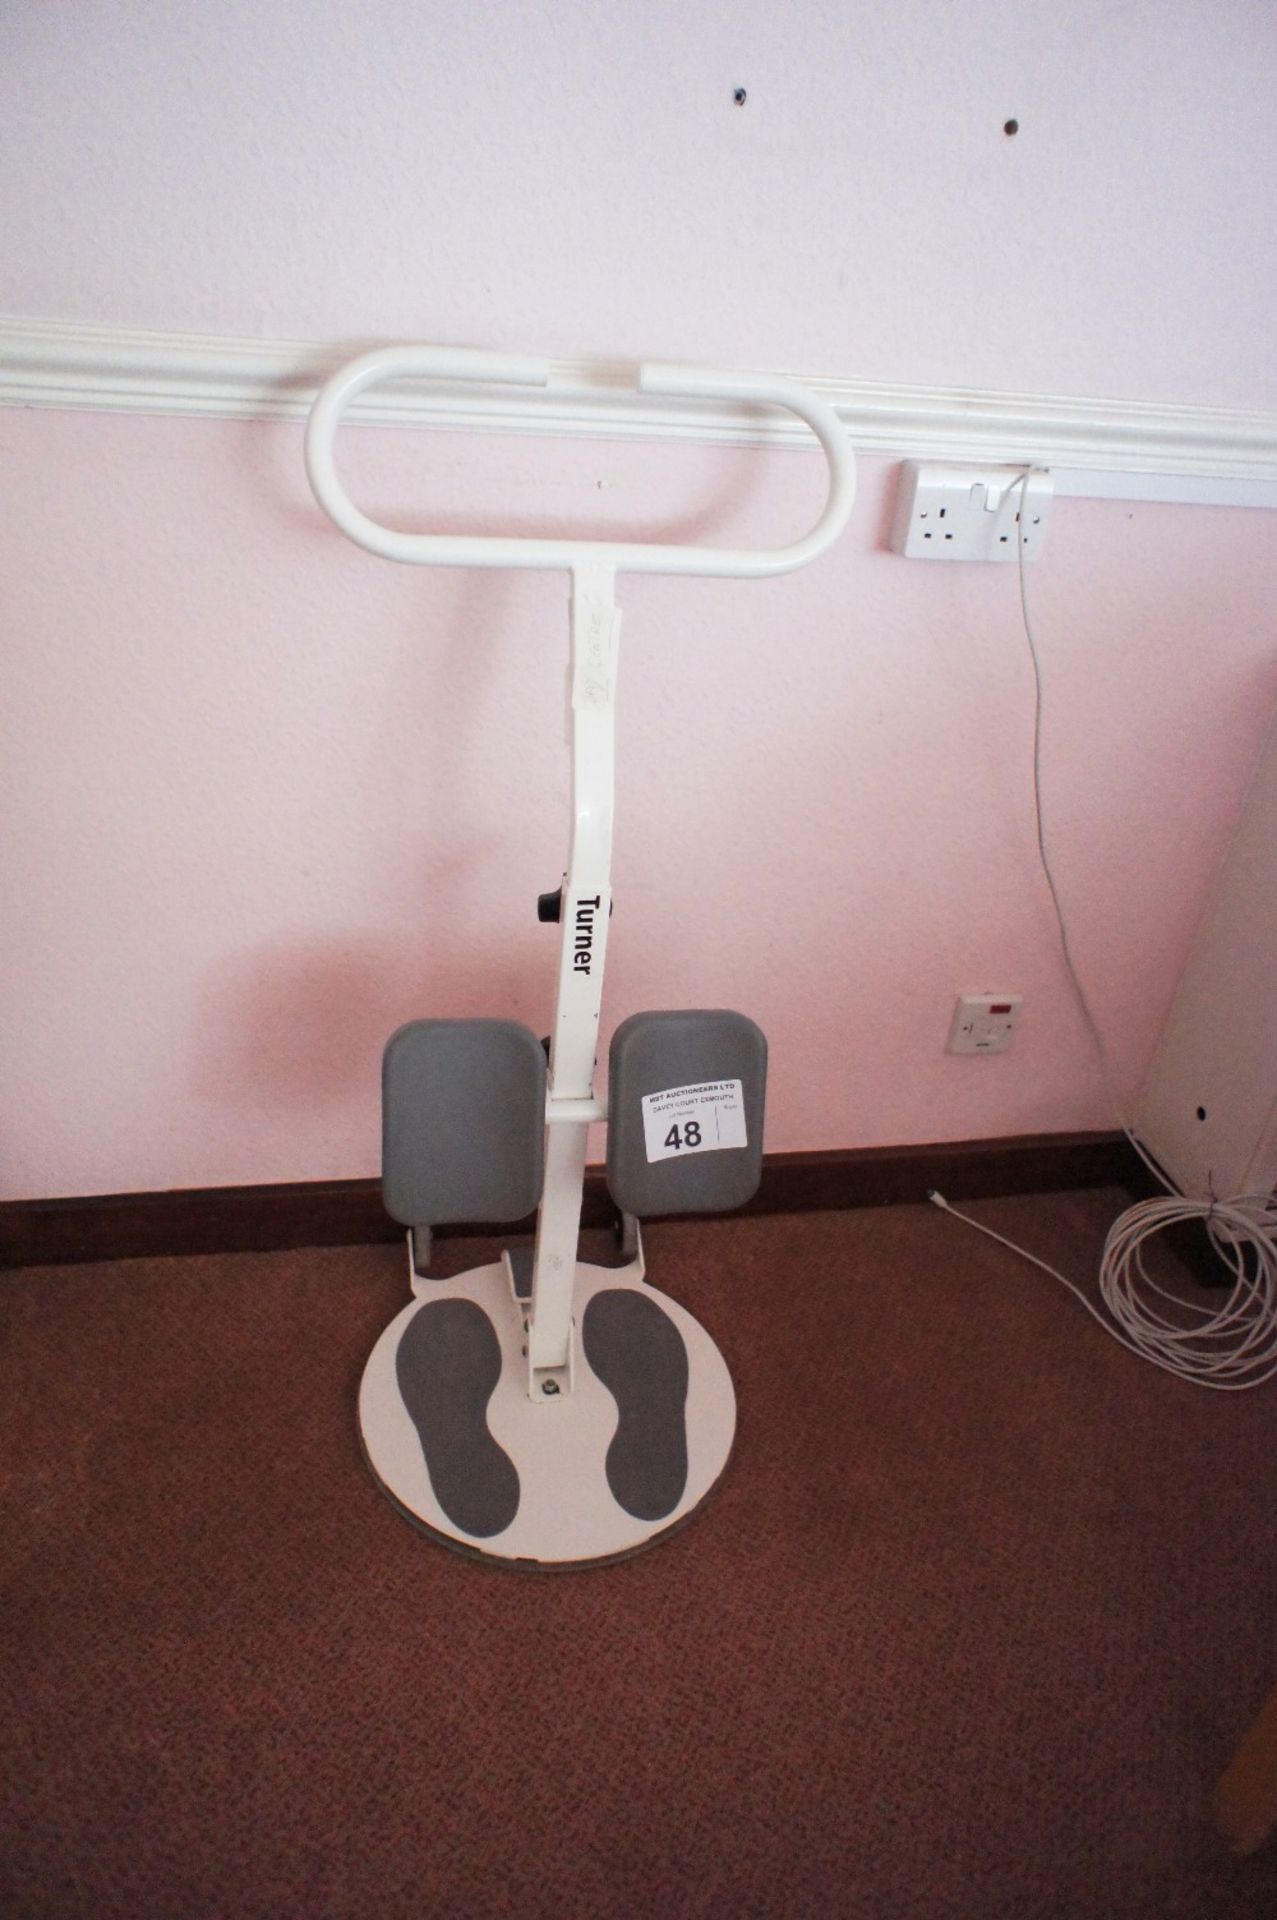 1 tubular patient Turner/trolley (located in room 18, Davey Court)